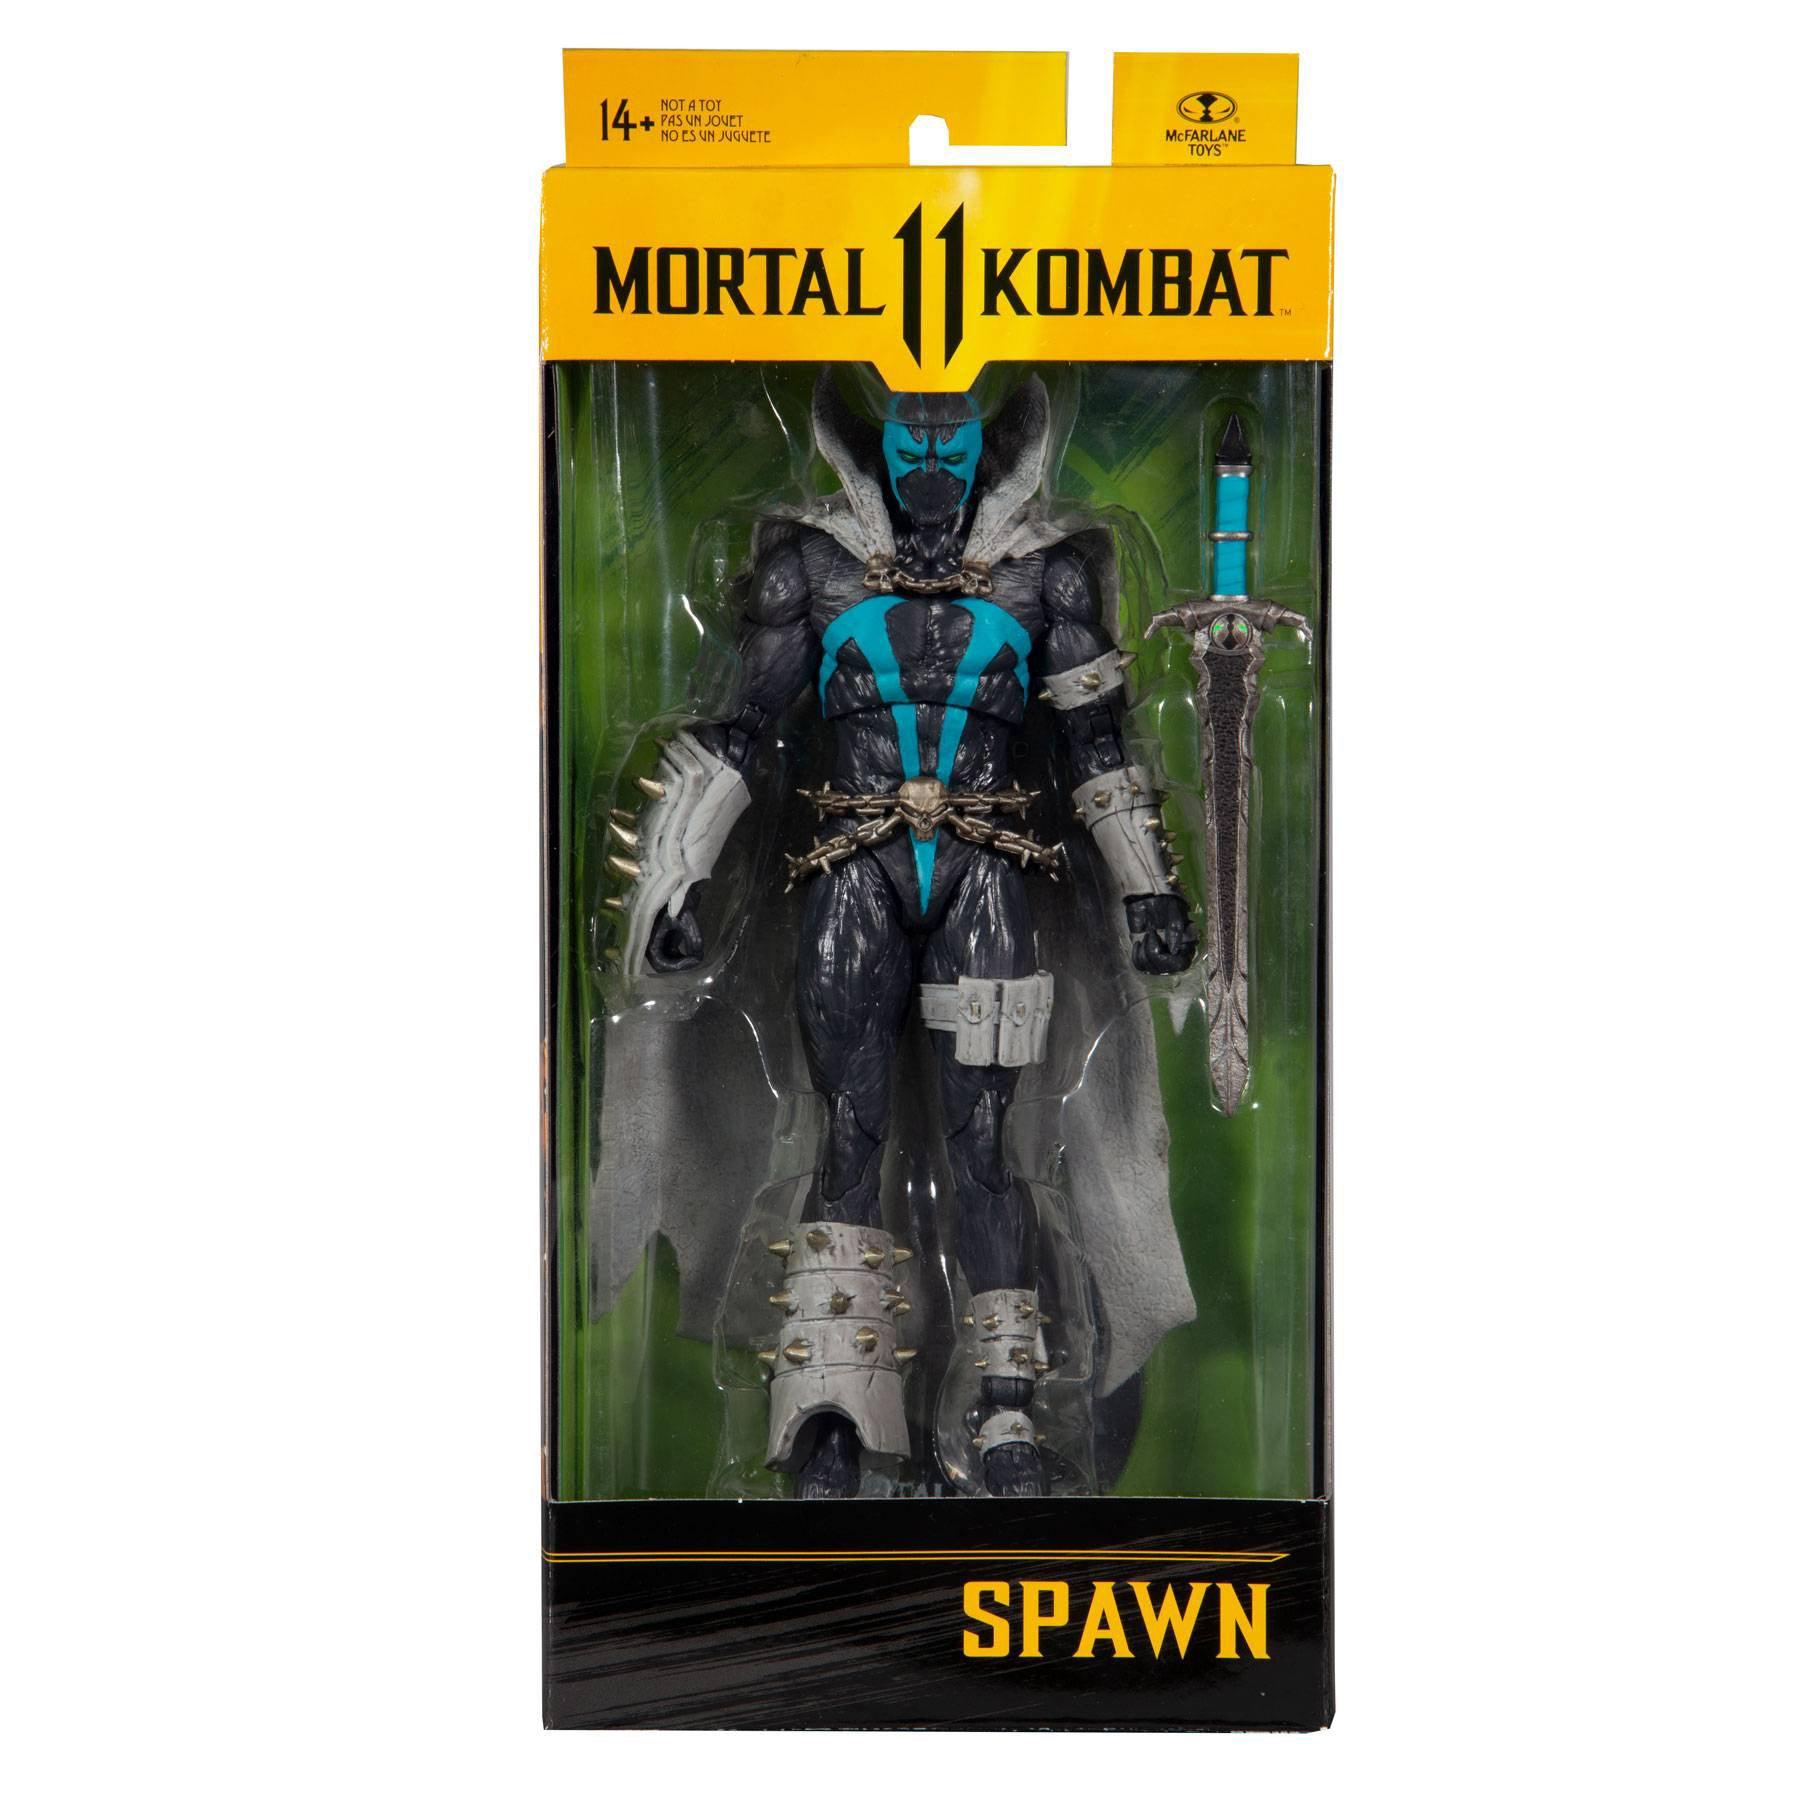 Mft Mk Spawn Lord Covenant - Want a New Gadget